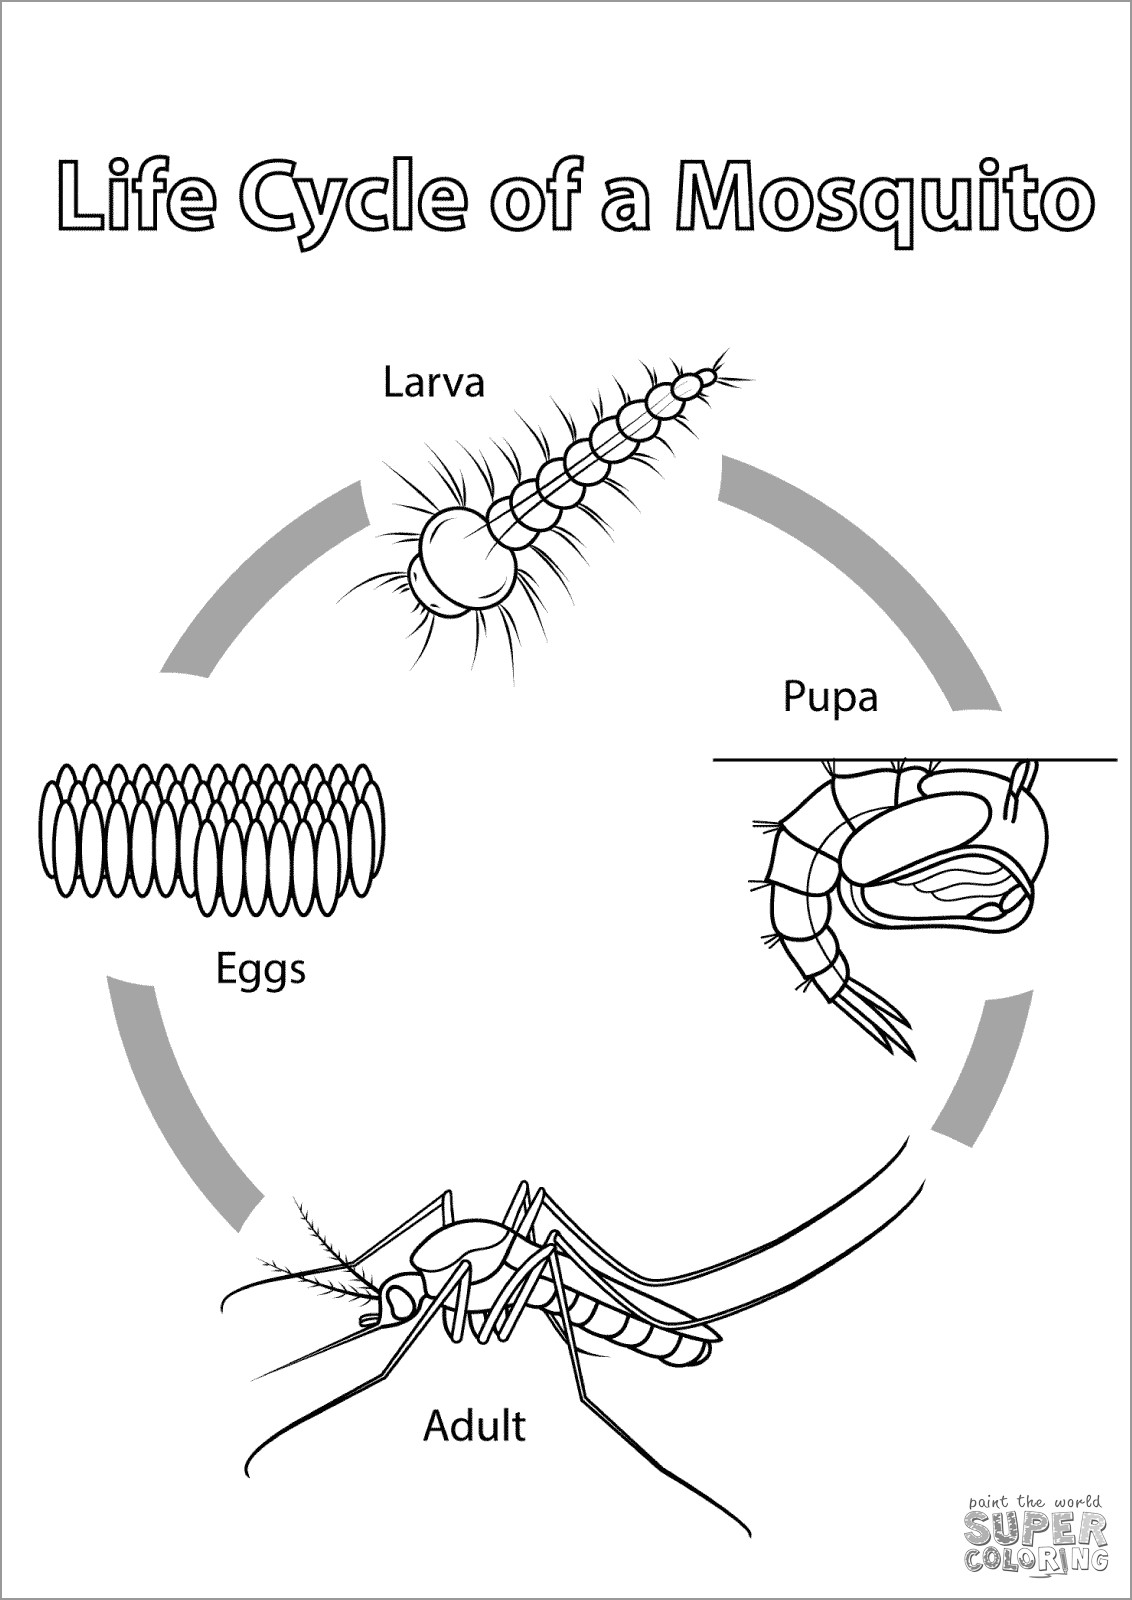 Mosquito Life Cycle Coloring Page